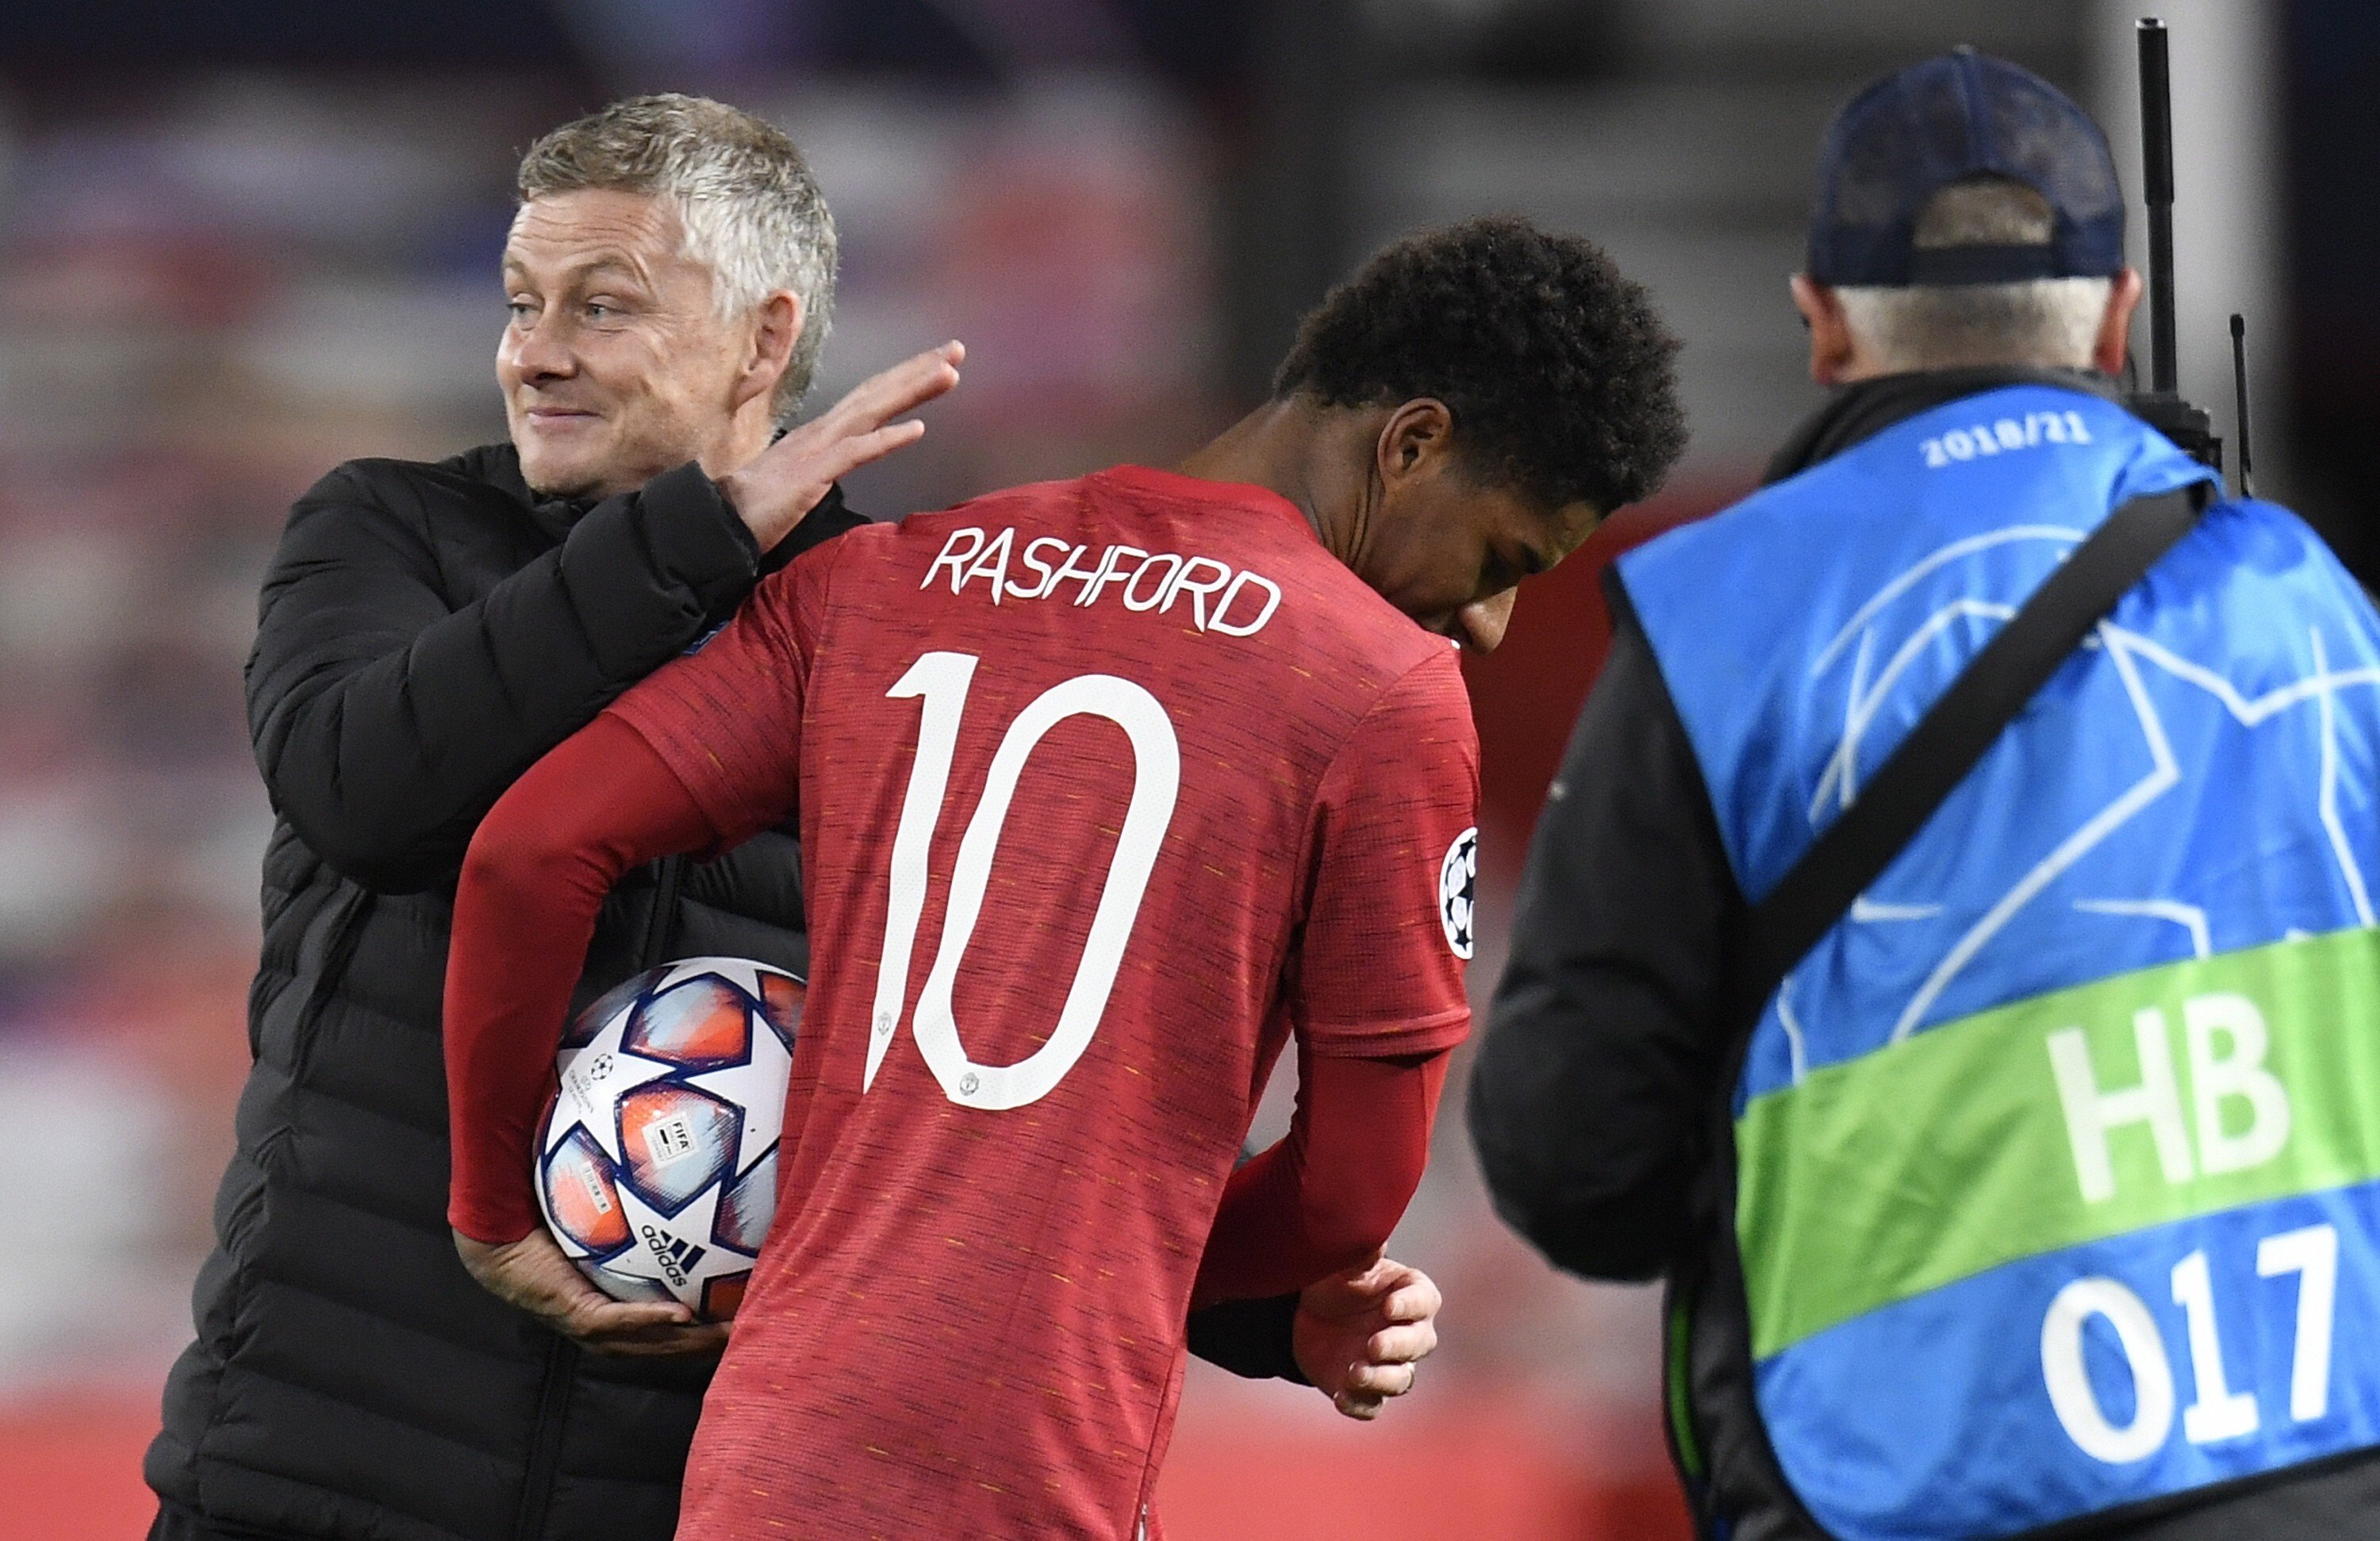 Manchester United forward Marcus Rashford gets a pat on the back by Ole Gunnar Solskjaer after their 5-0 victory in the Uefa Champions League against RB Leipzig in Manchester in October 2020. Photo: EPA